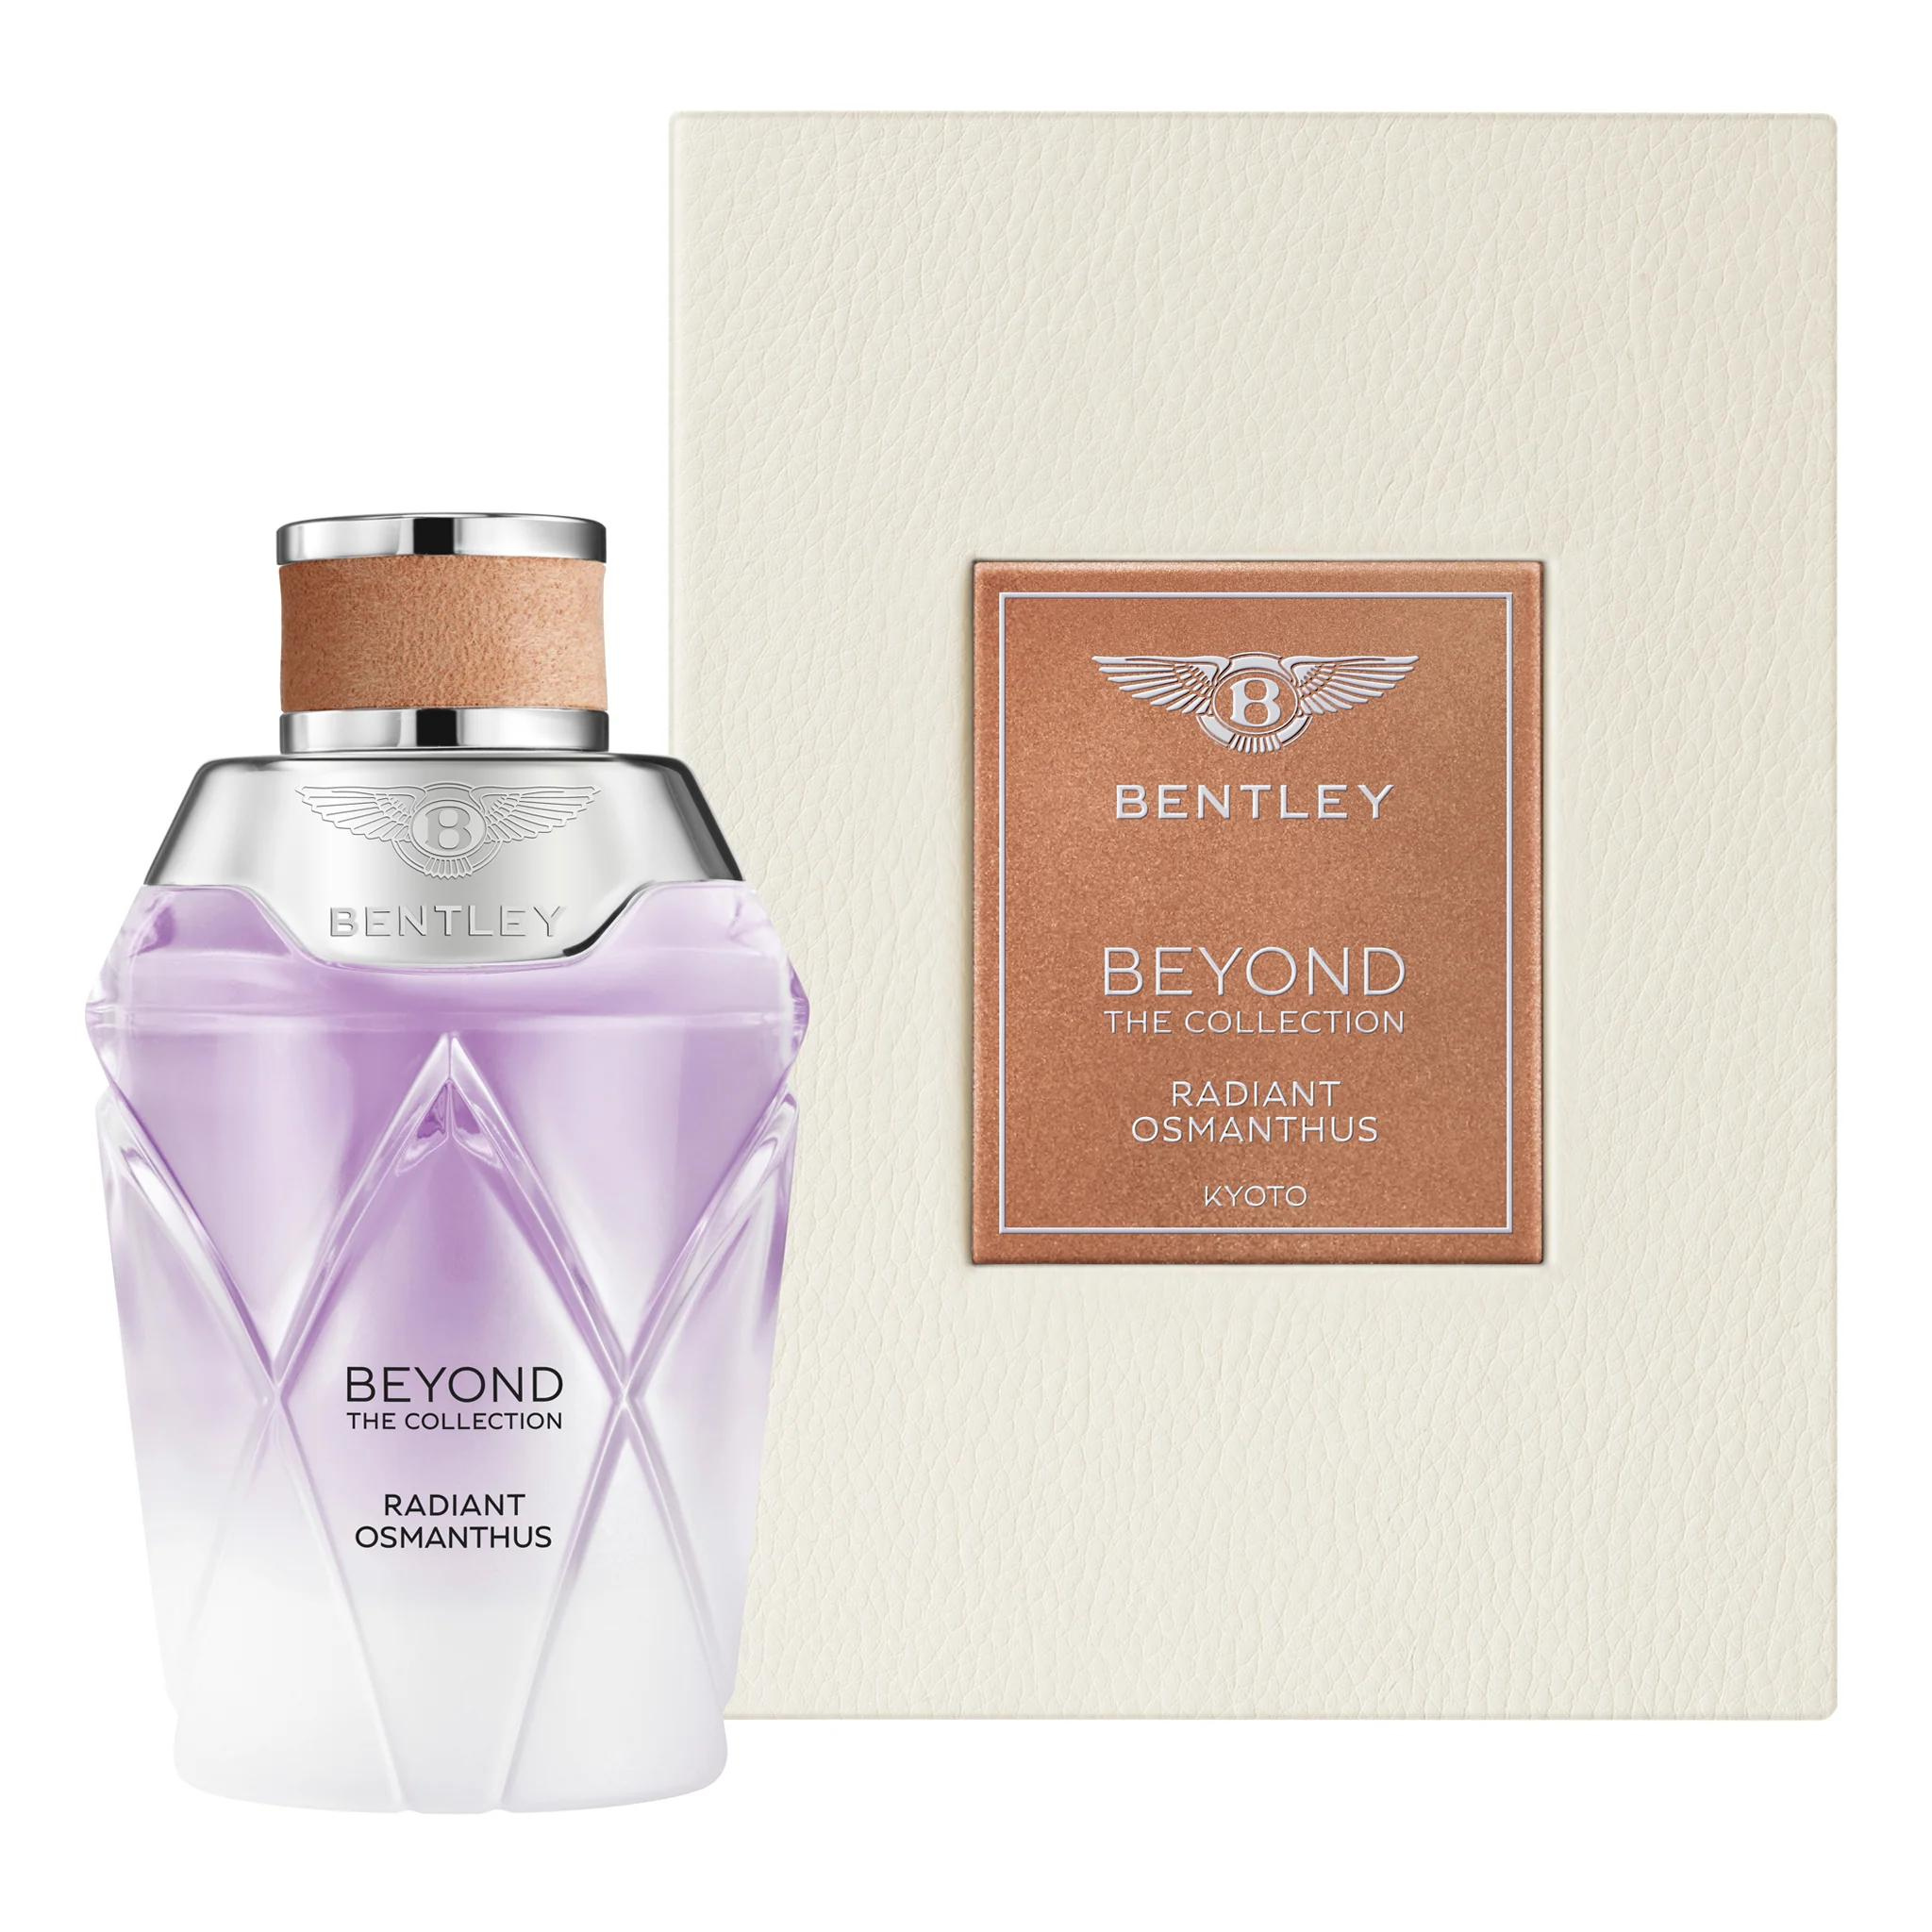 Bentley beyonde the collection Radiant Osmanthus